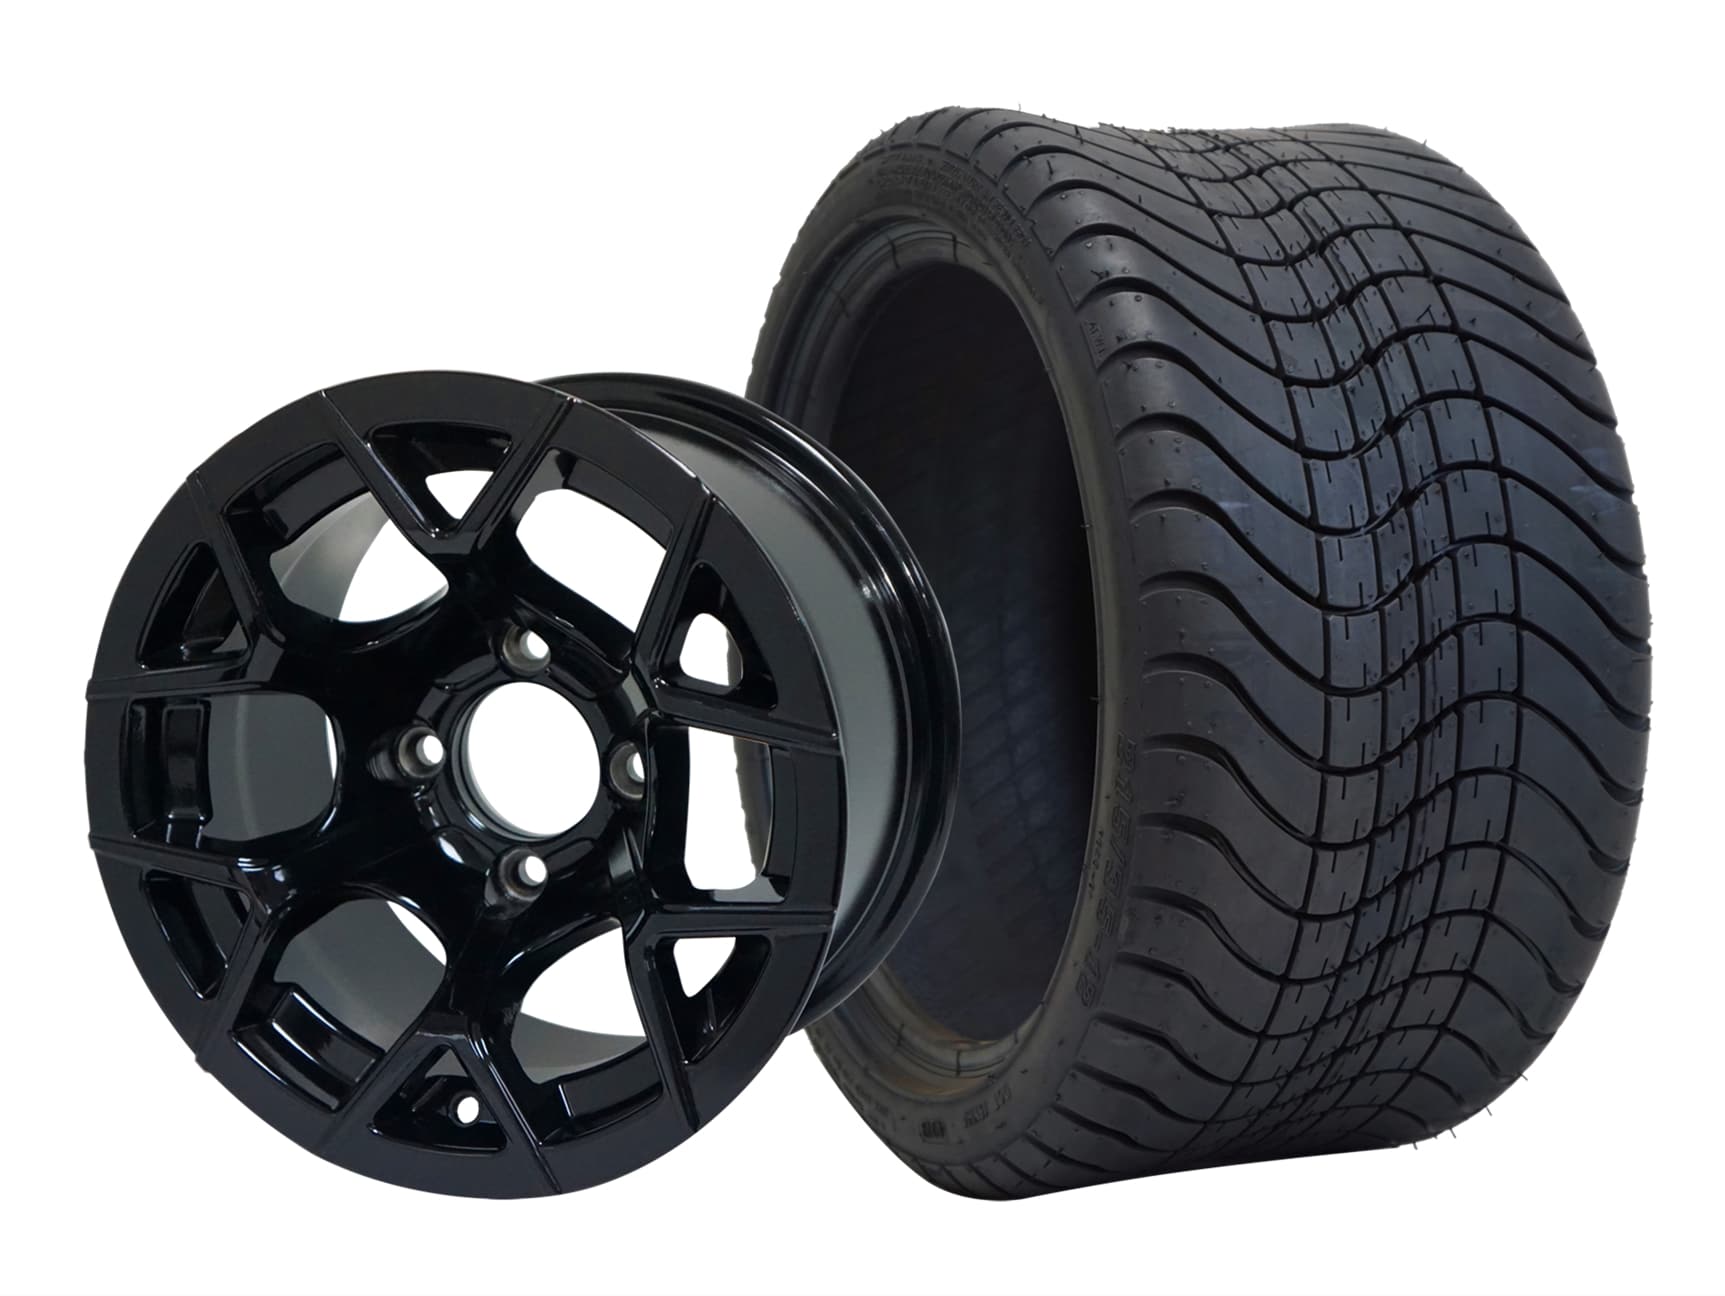 BNDL-TR1212-WH1227-CC0002-LN0002 12″ RALLY GLOSSY BLACK WHEEL – ALUMINUM ALLOY / STEELENG 215/35-12 LOW PROFILE TIRE